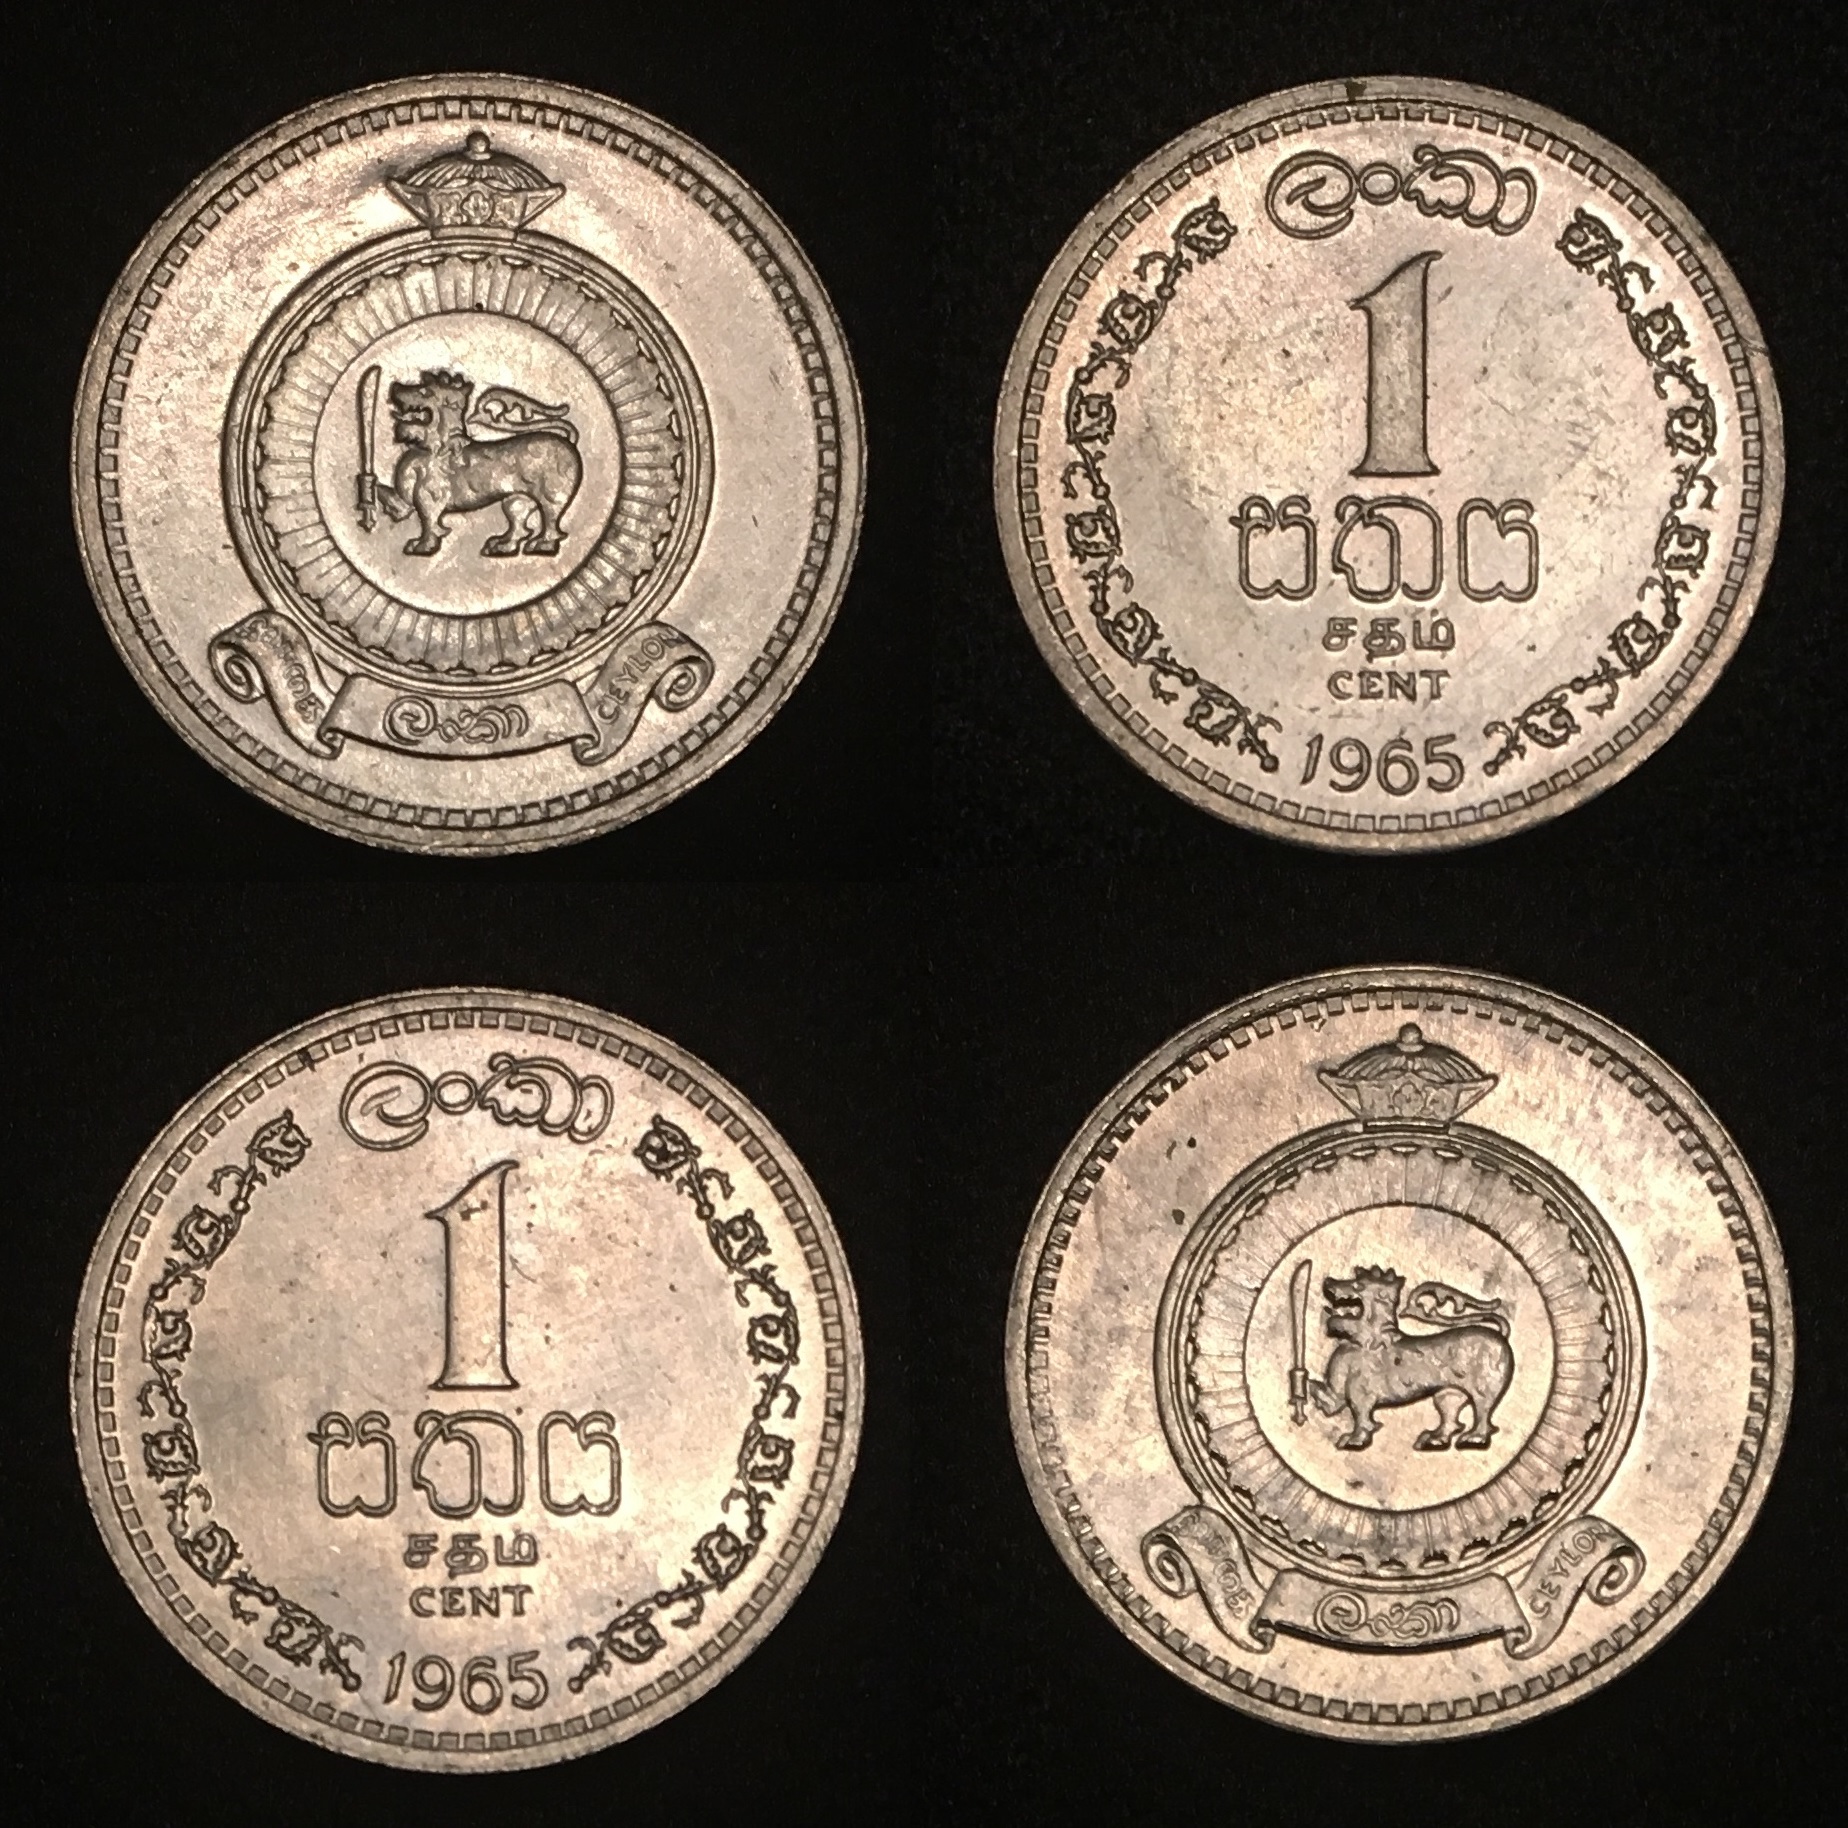 1965 1 Cent Combined.jpg